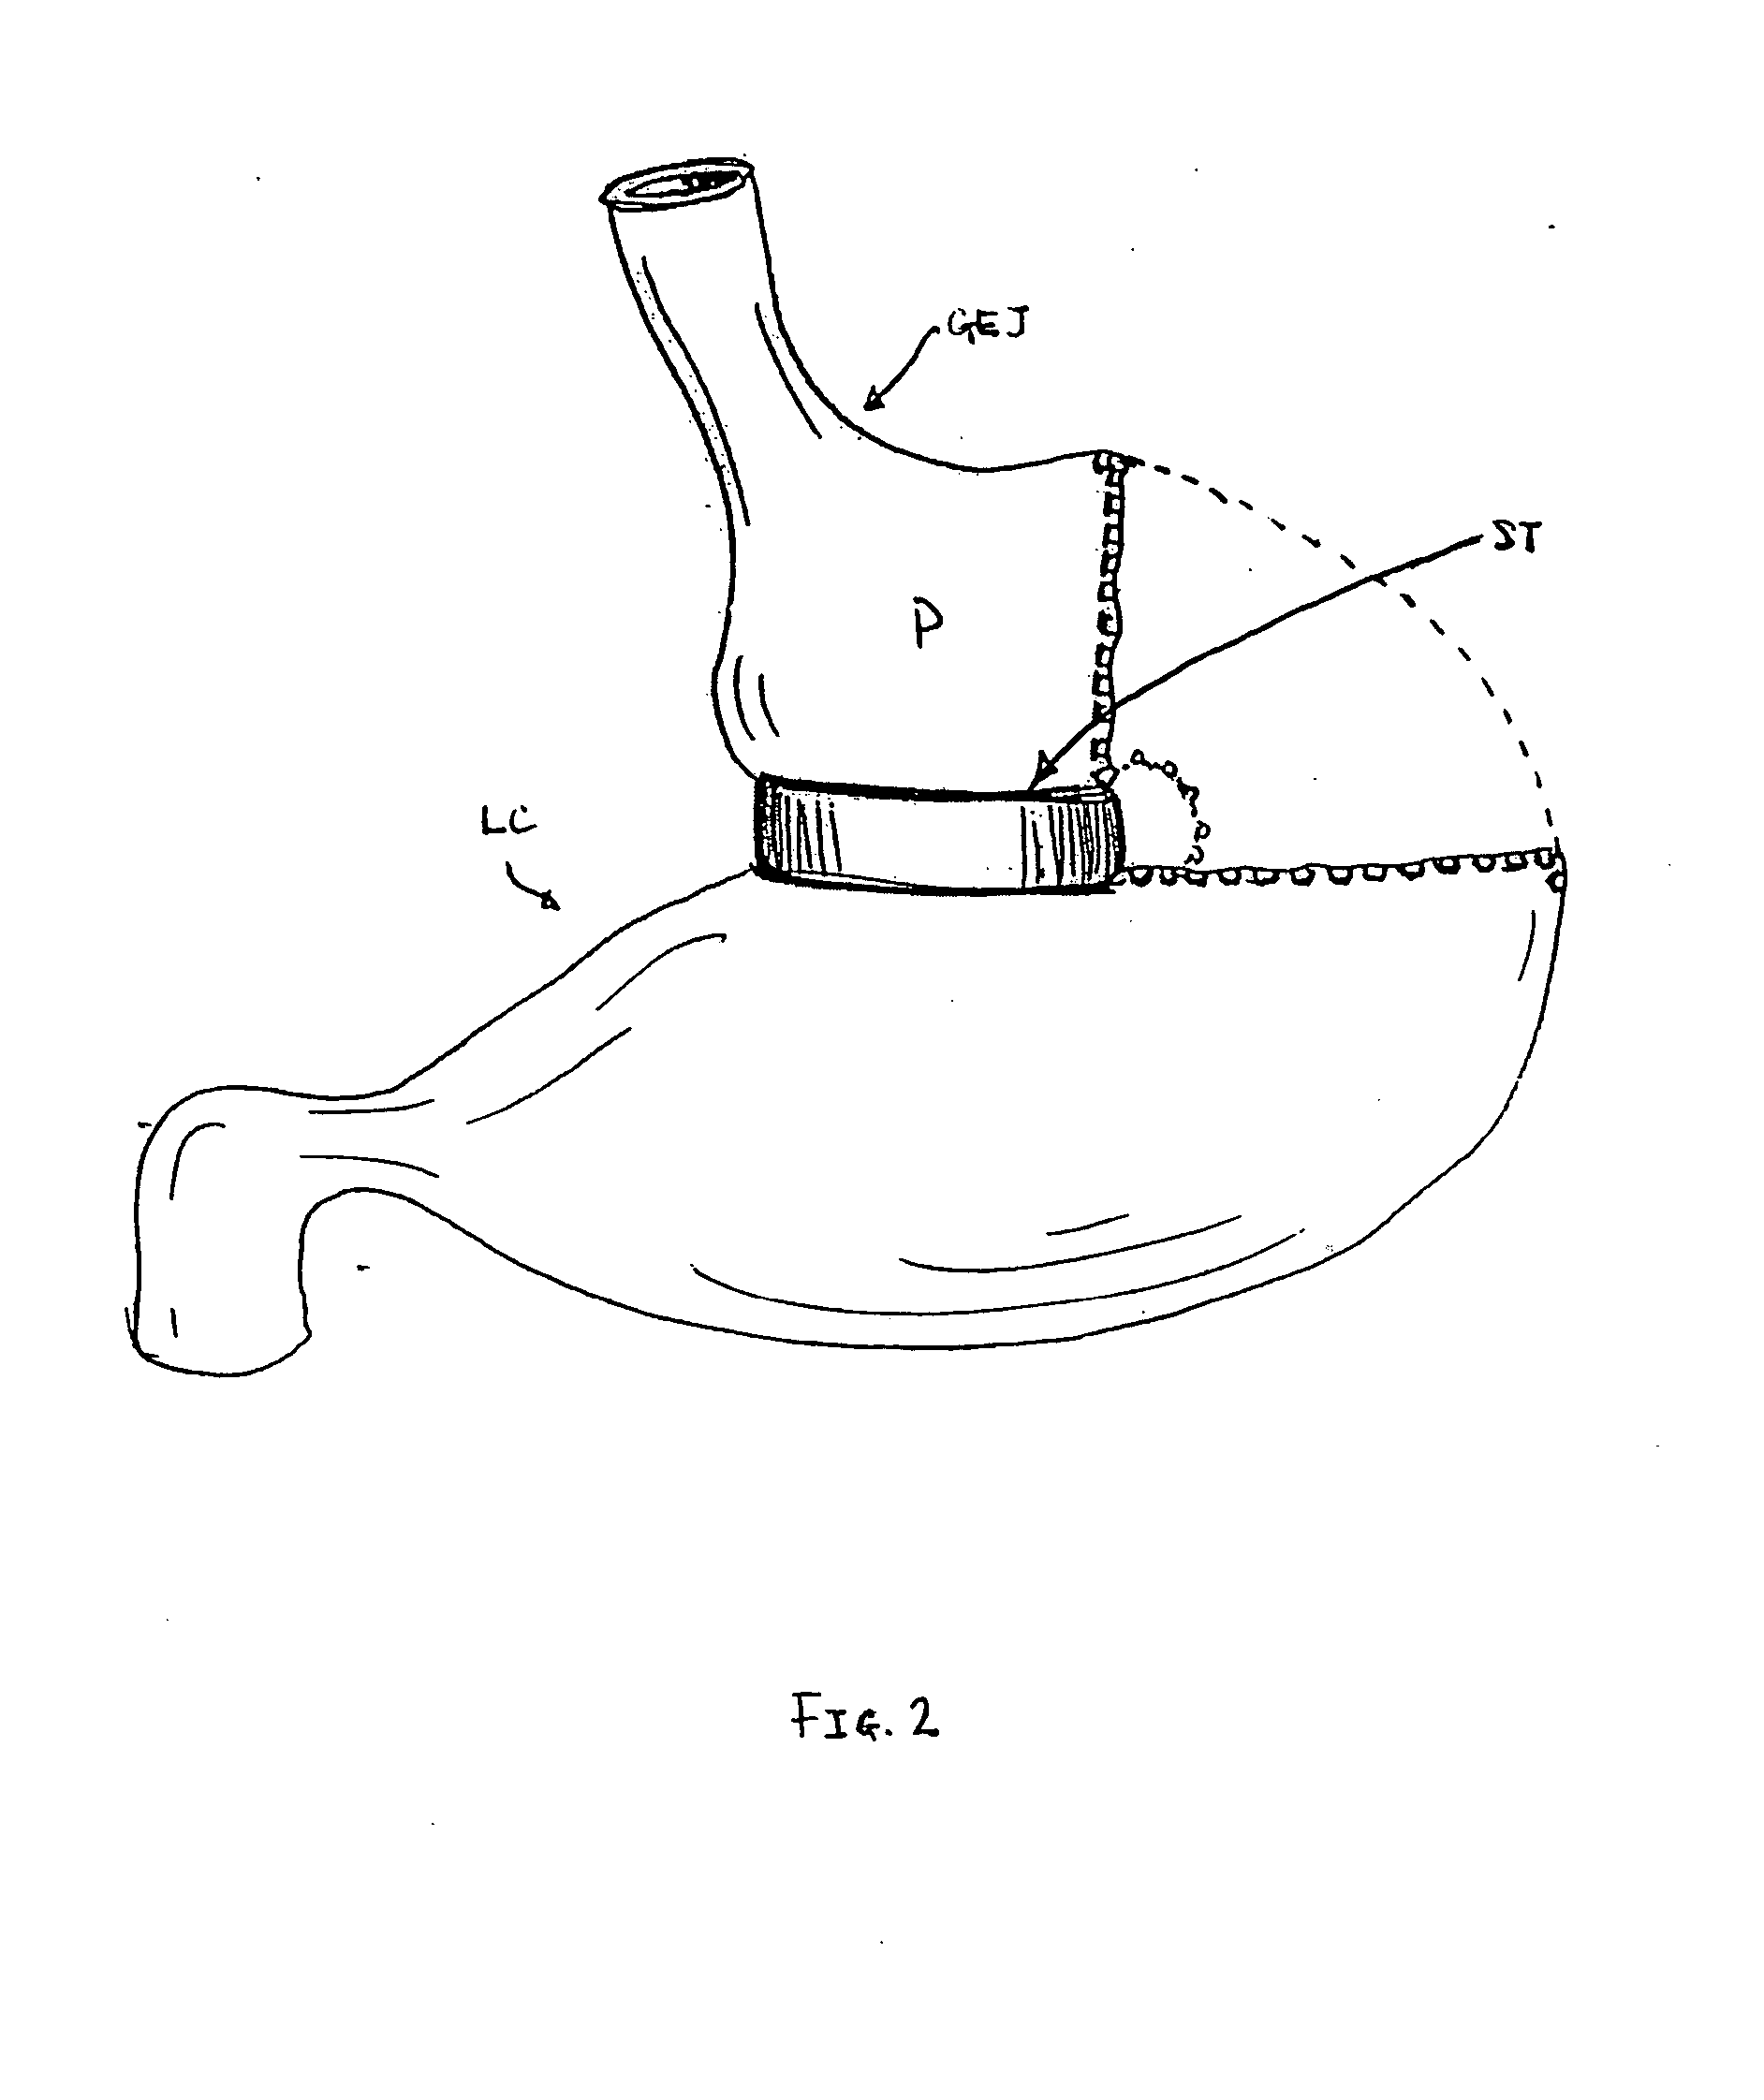 Method and device for use in endoscopic organ procedures